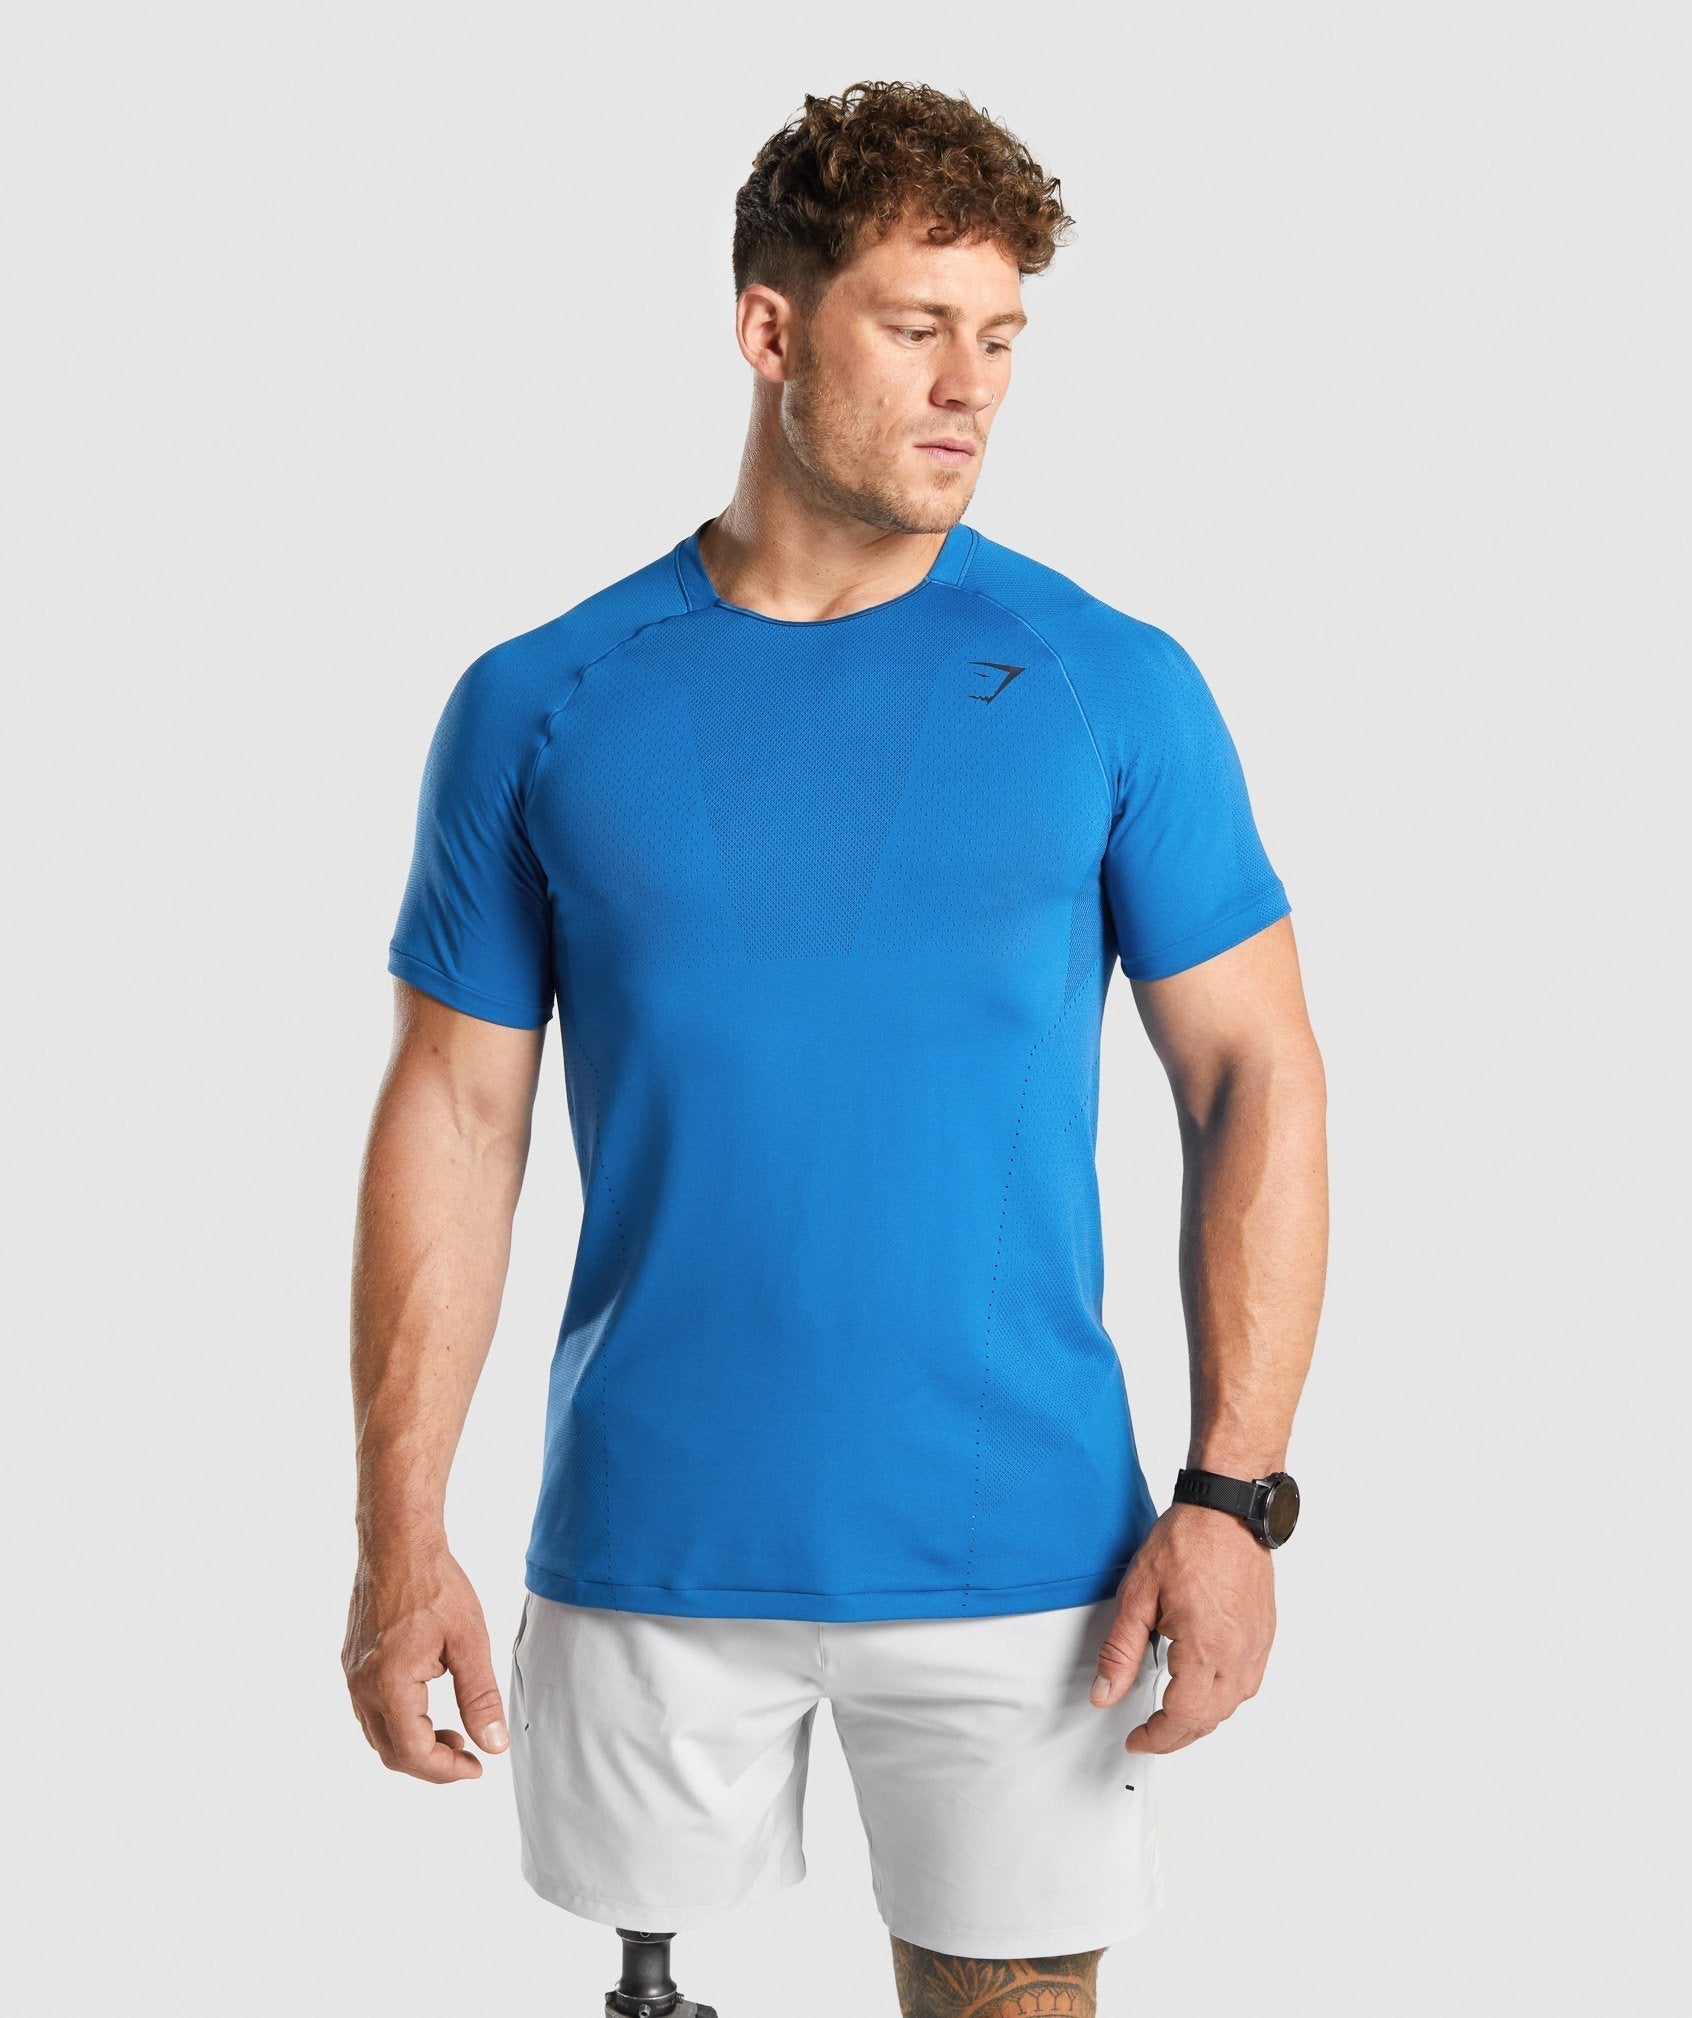 Apex Perform T-shirt in Blue - view 1